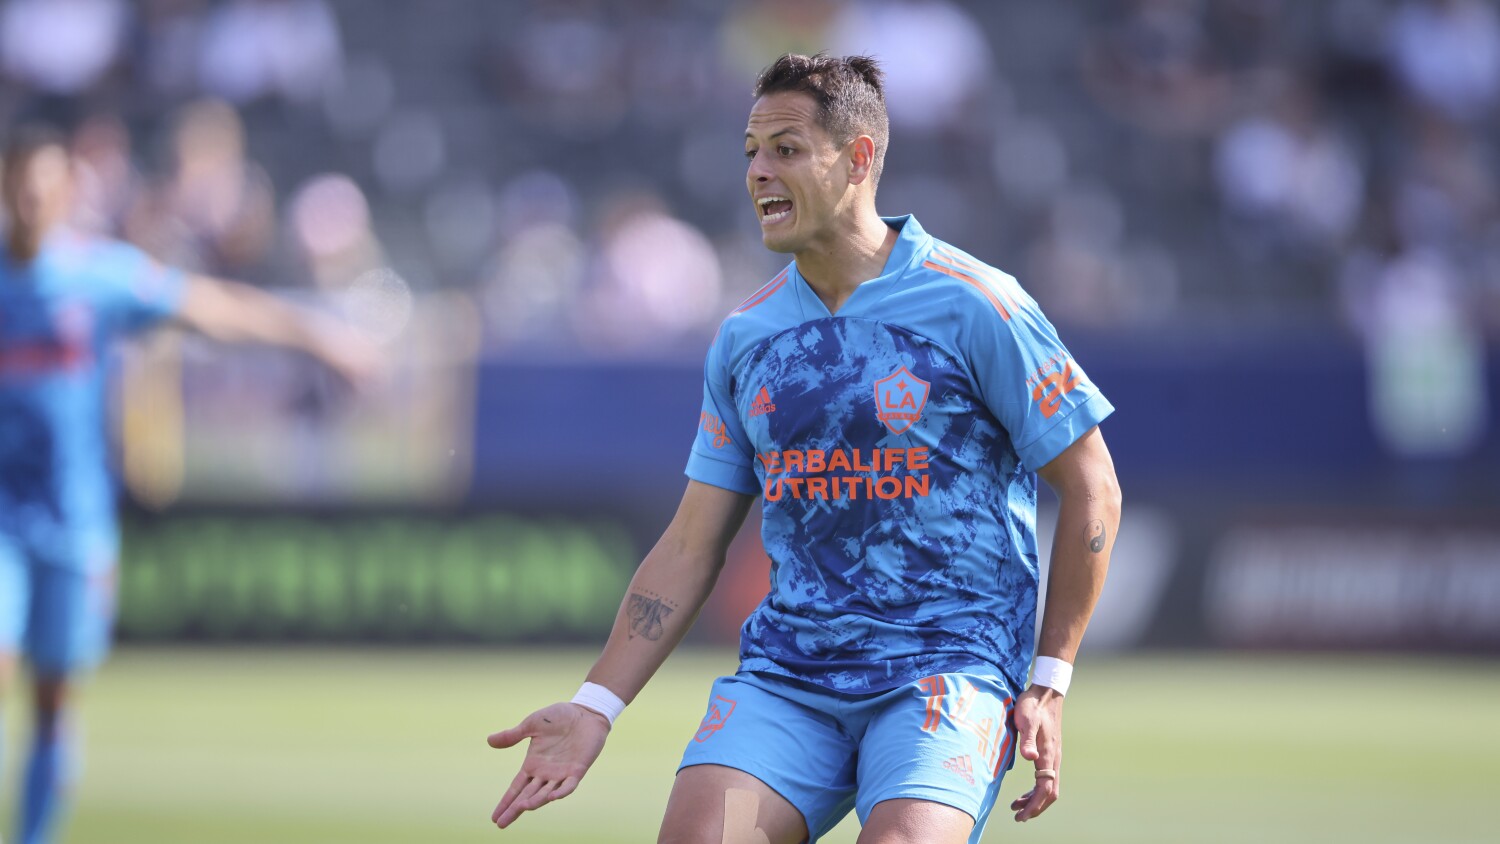 Injuries to Javier 'Chicharito' Hernández and Sega Coulibaly hurt Galaxy in loss